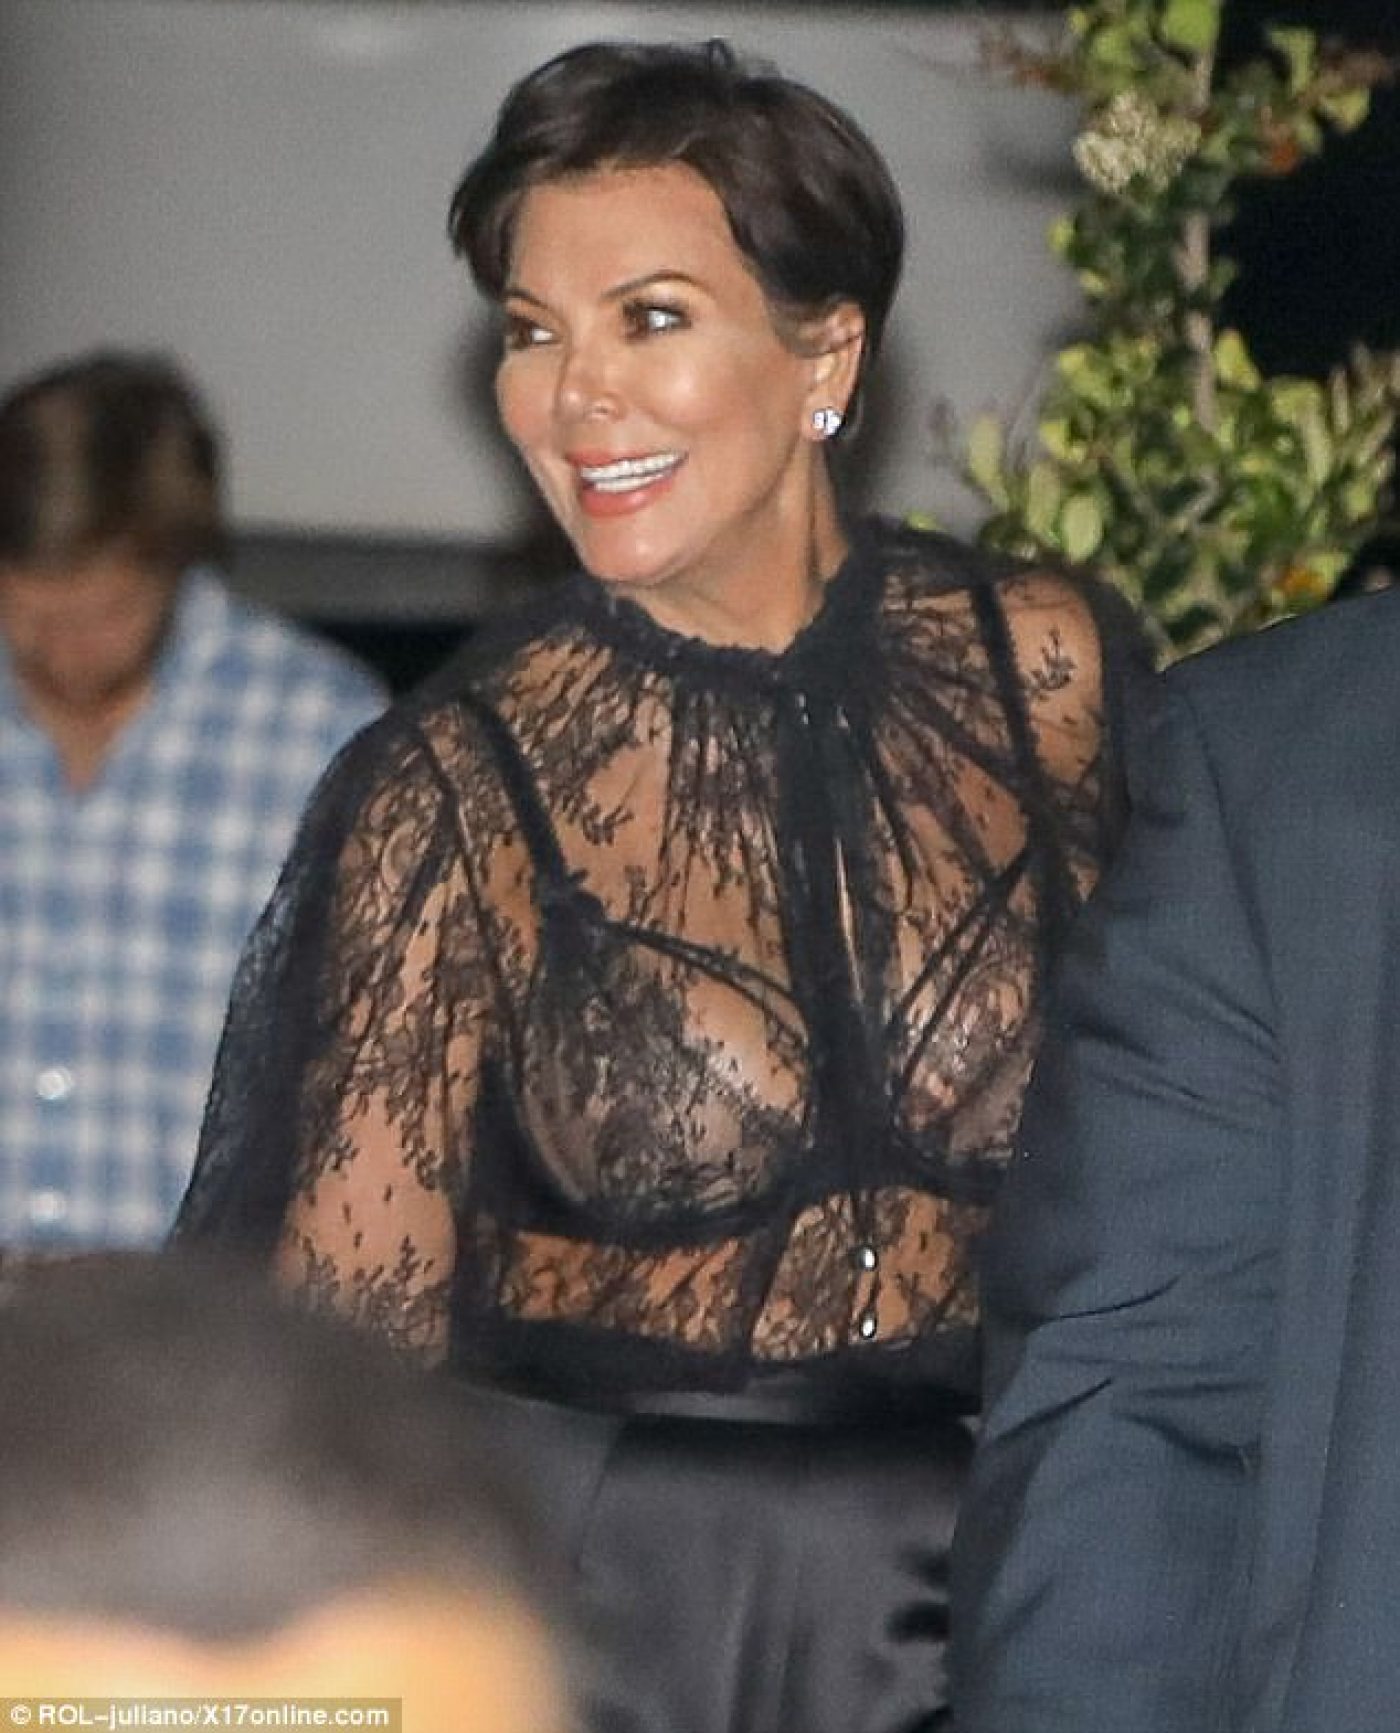 Kris Jenner Proves Age Is Just A Number When It Comes To Fashion.